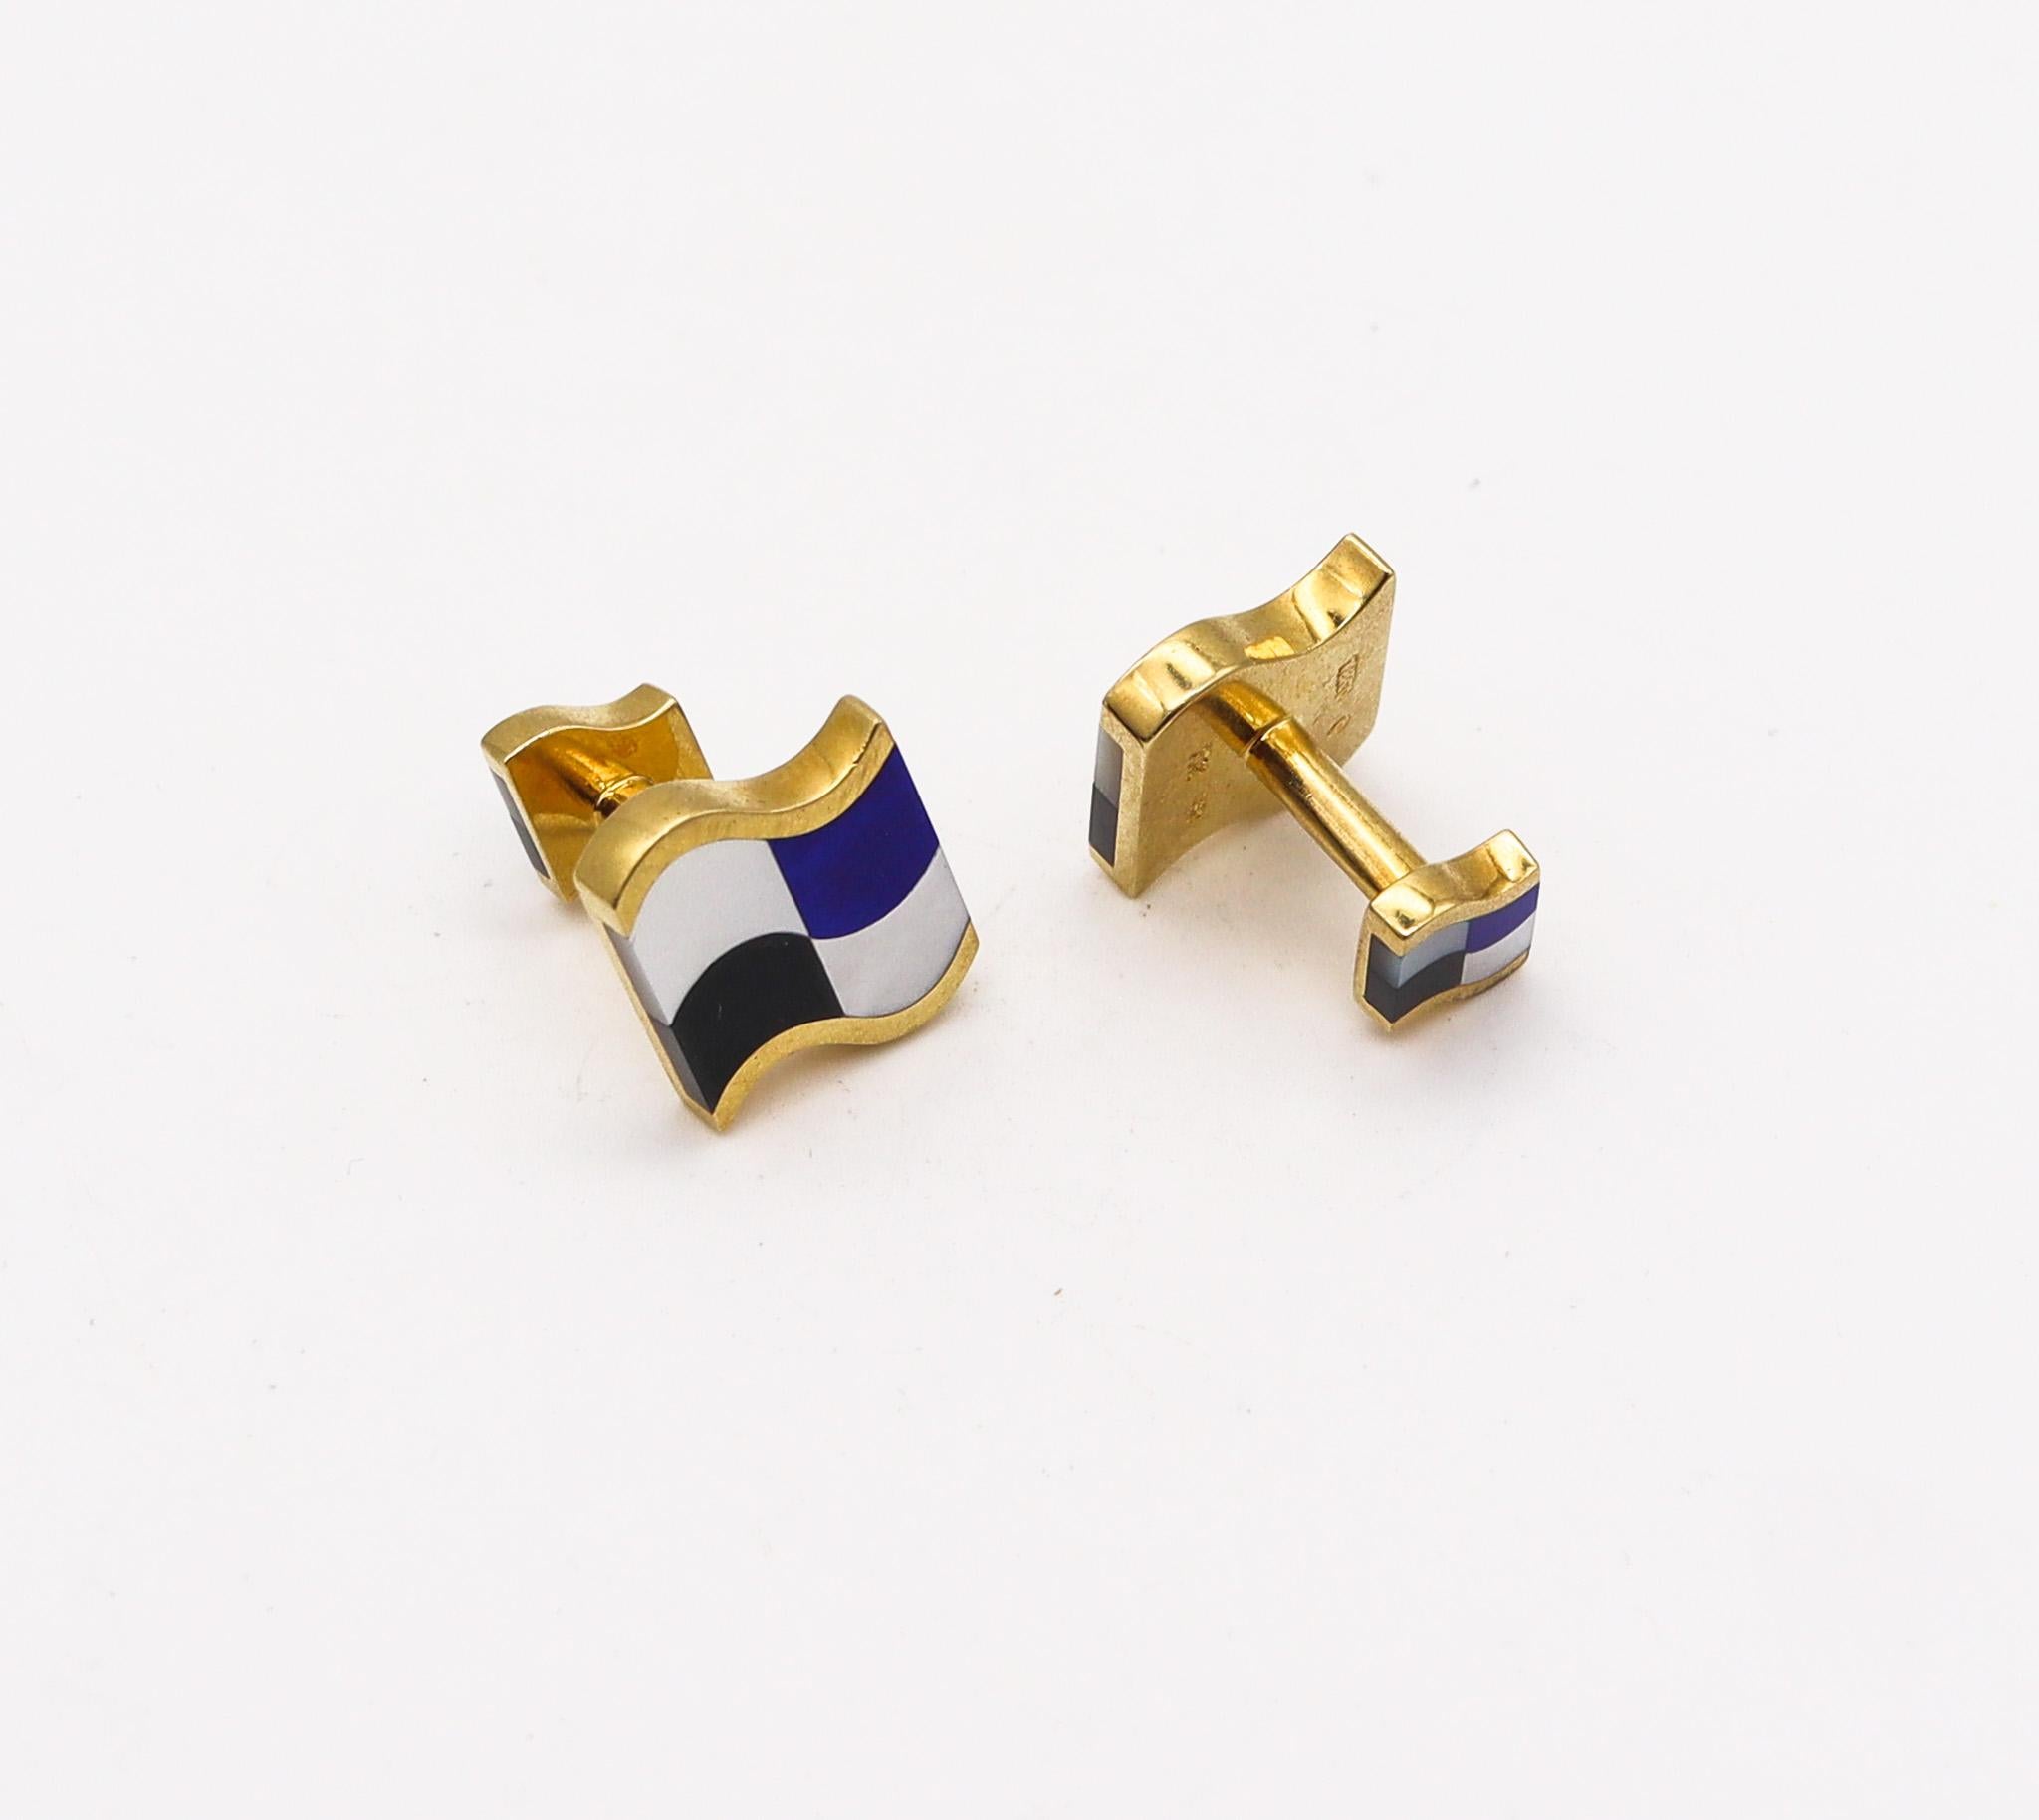 Pair of cufflinks designed by Angela Cummings for Tiffany & Co.

A beautiful and colorful pair of cufflinks, created in New York city by Angela Cummings at the Tiffany & Co. studios, back in the 1980. These cufflinks have been crafted with wavy